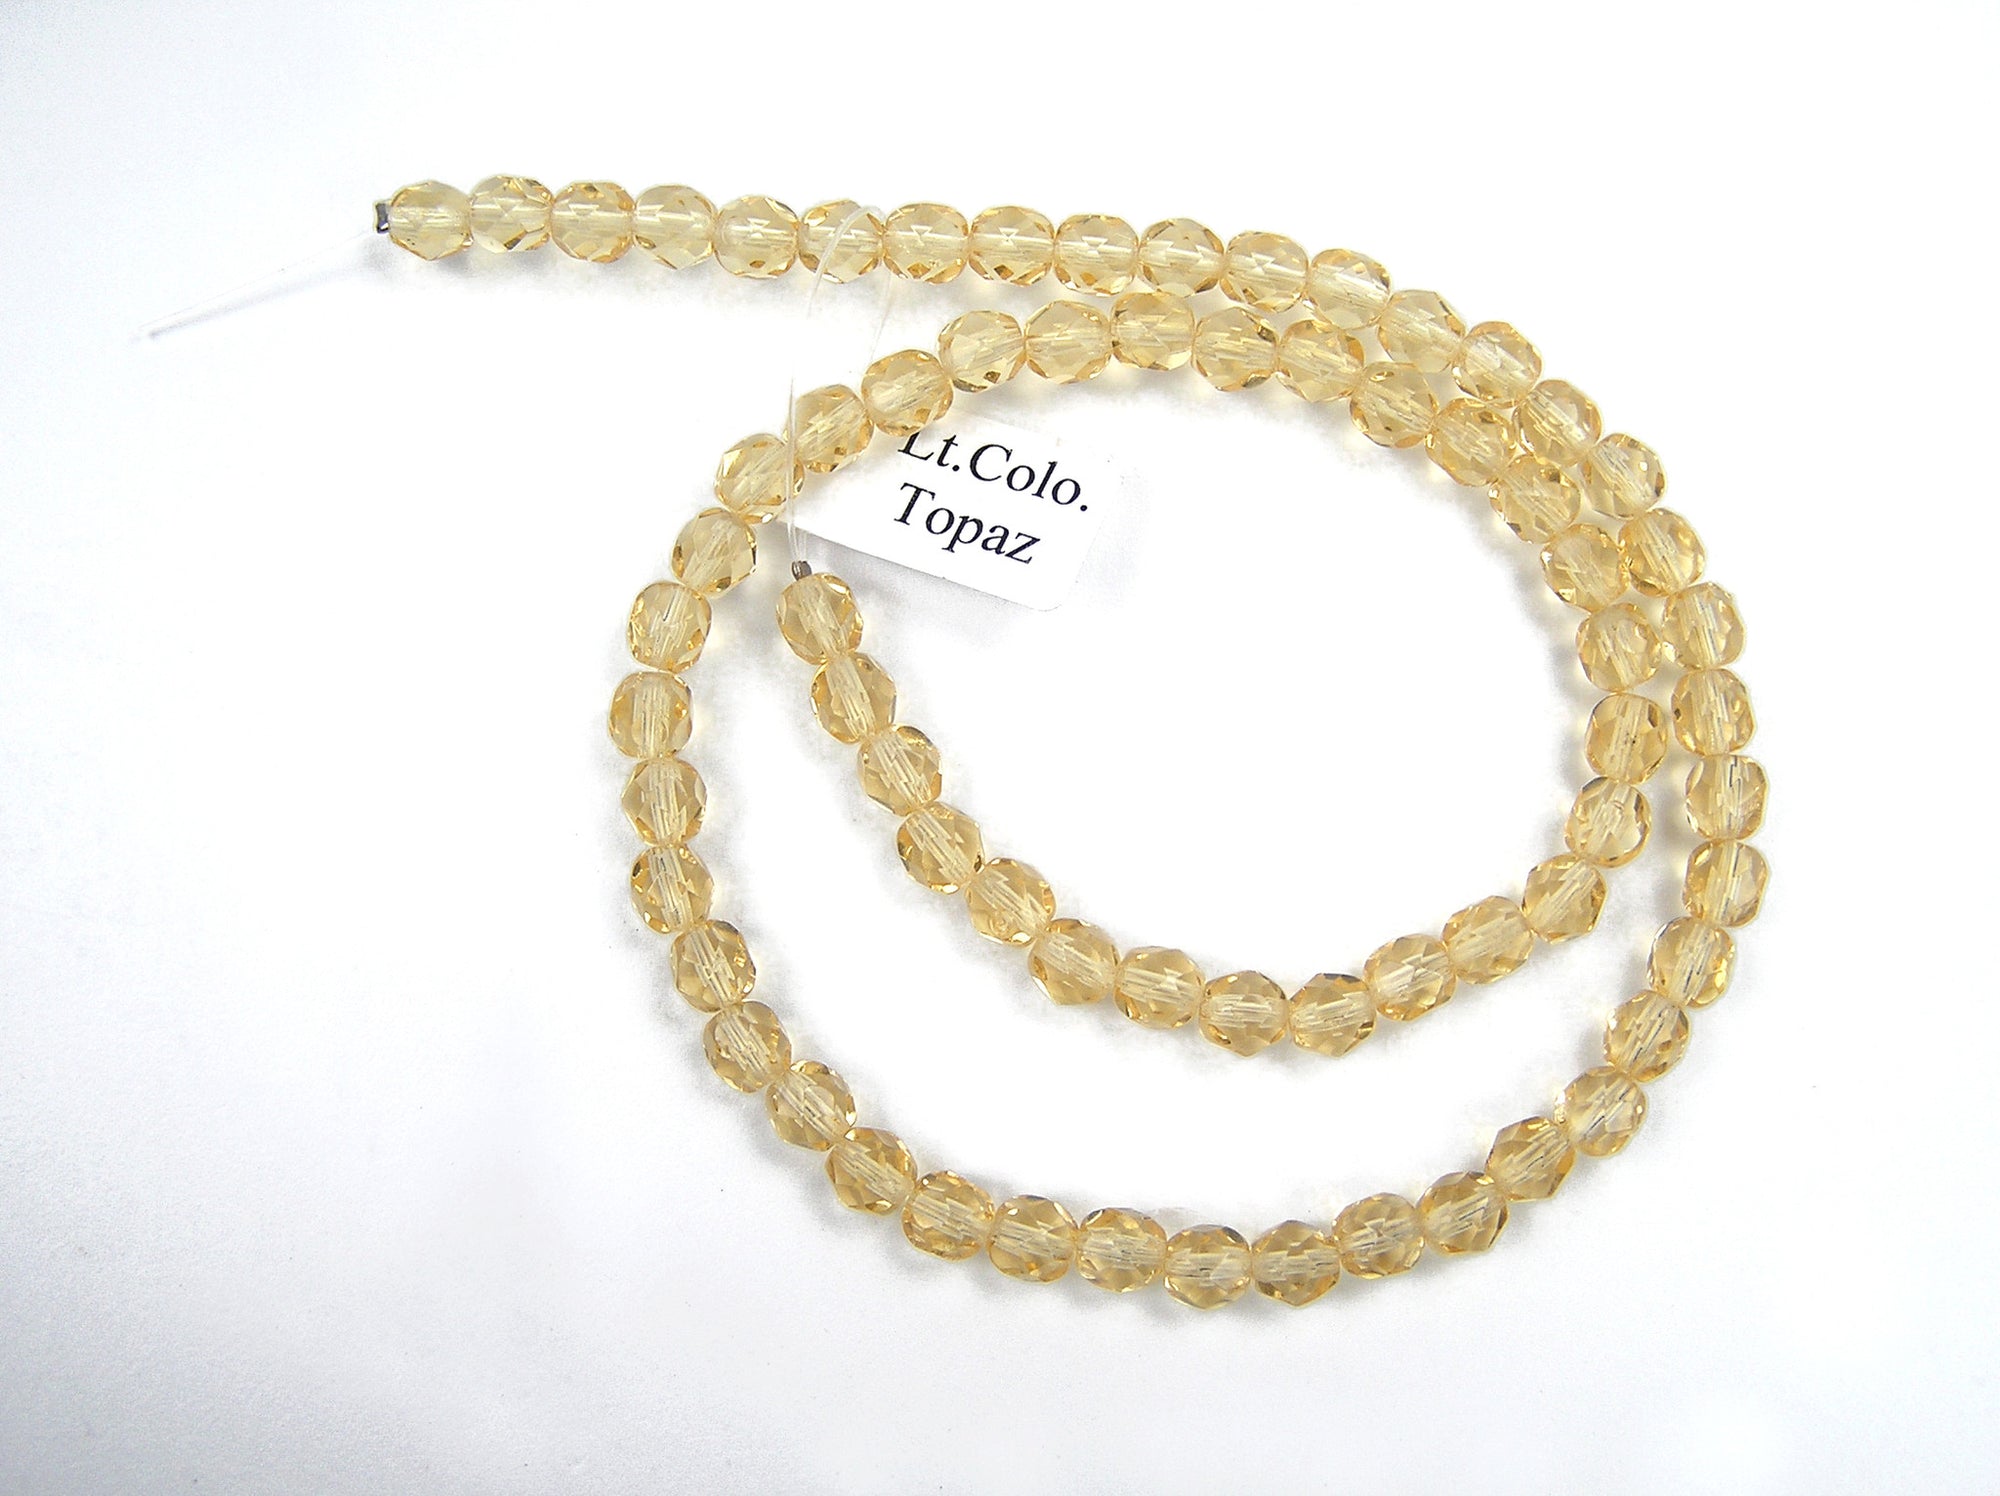 Light Colorado Topaz, Czech Fire Polished Round Faceted Glass Beads, 16 inch strand